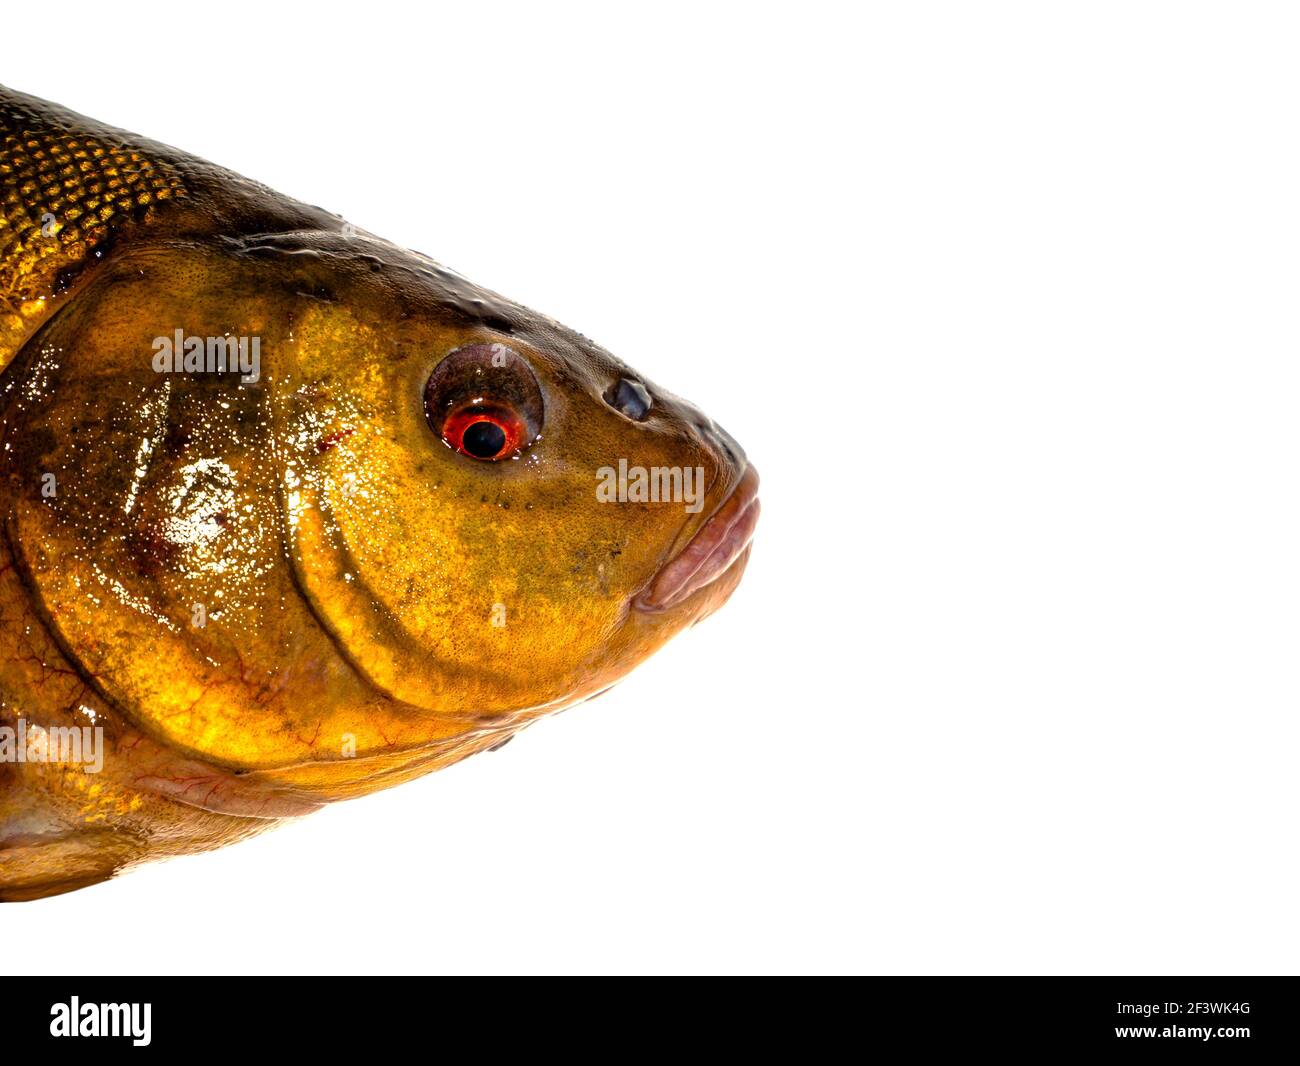 Freshwater fish tench on a white background. Stock Photo